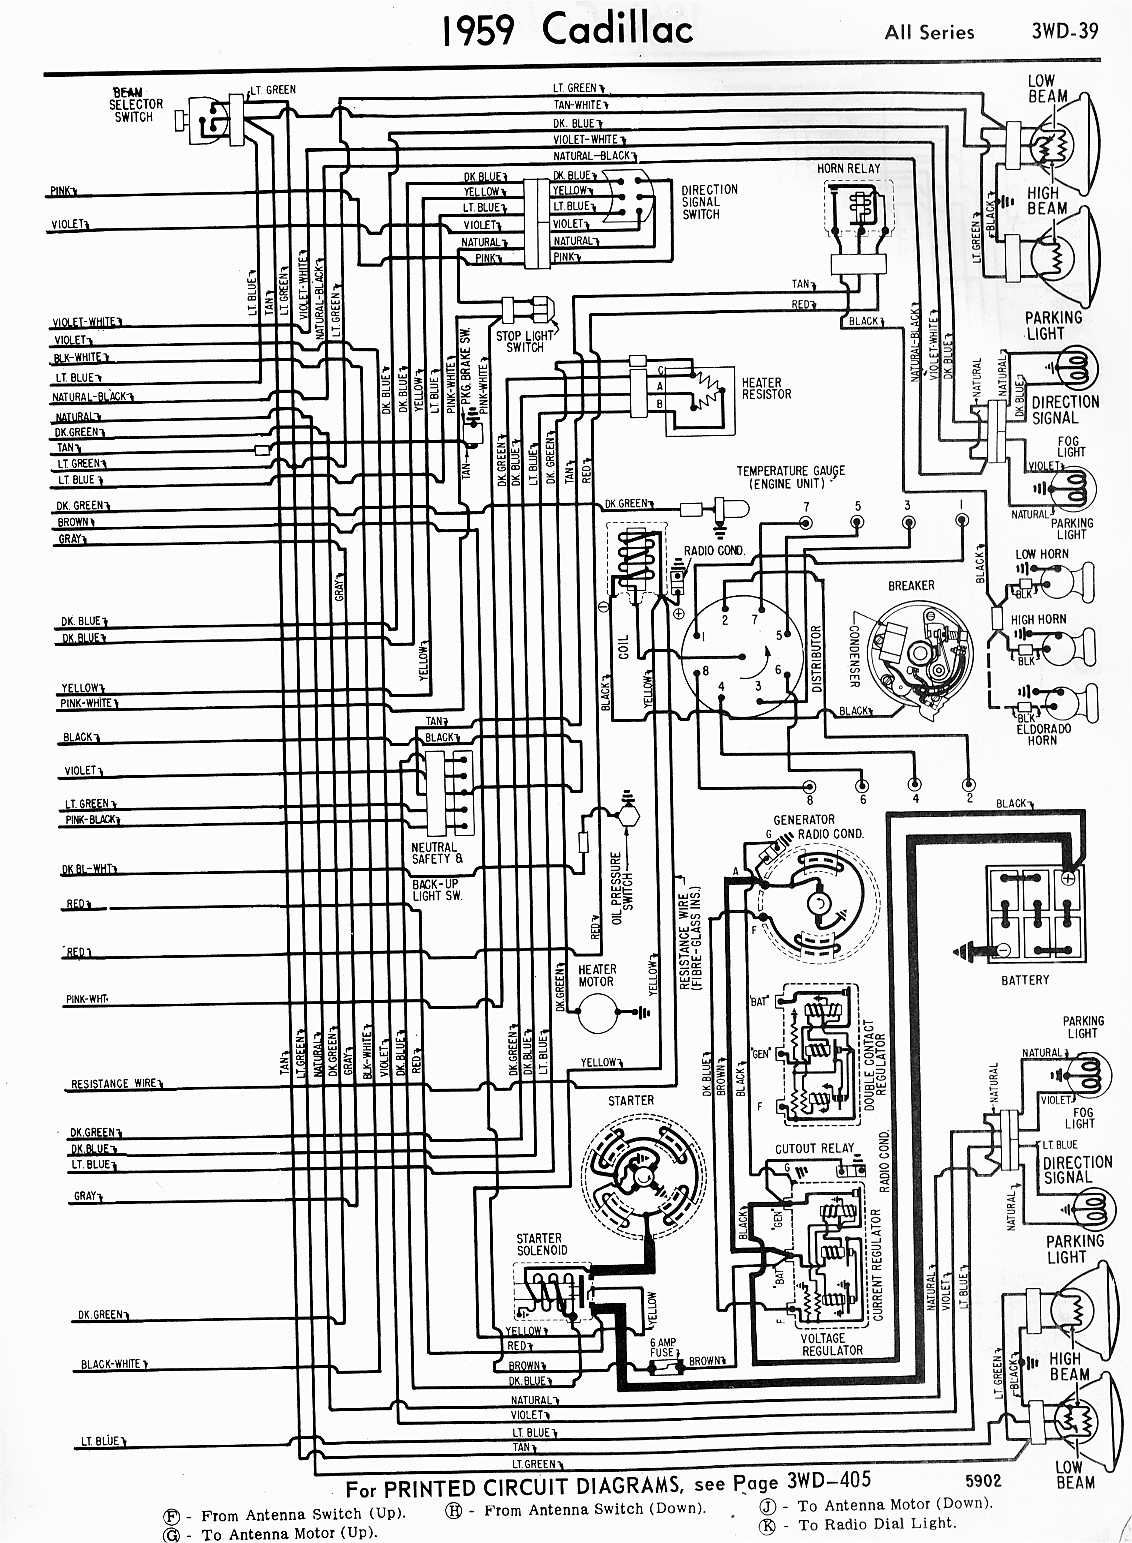 Cadillac Wiring Diagrams: 1957-1965 hvac blower wiring colors 